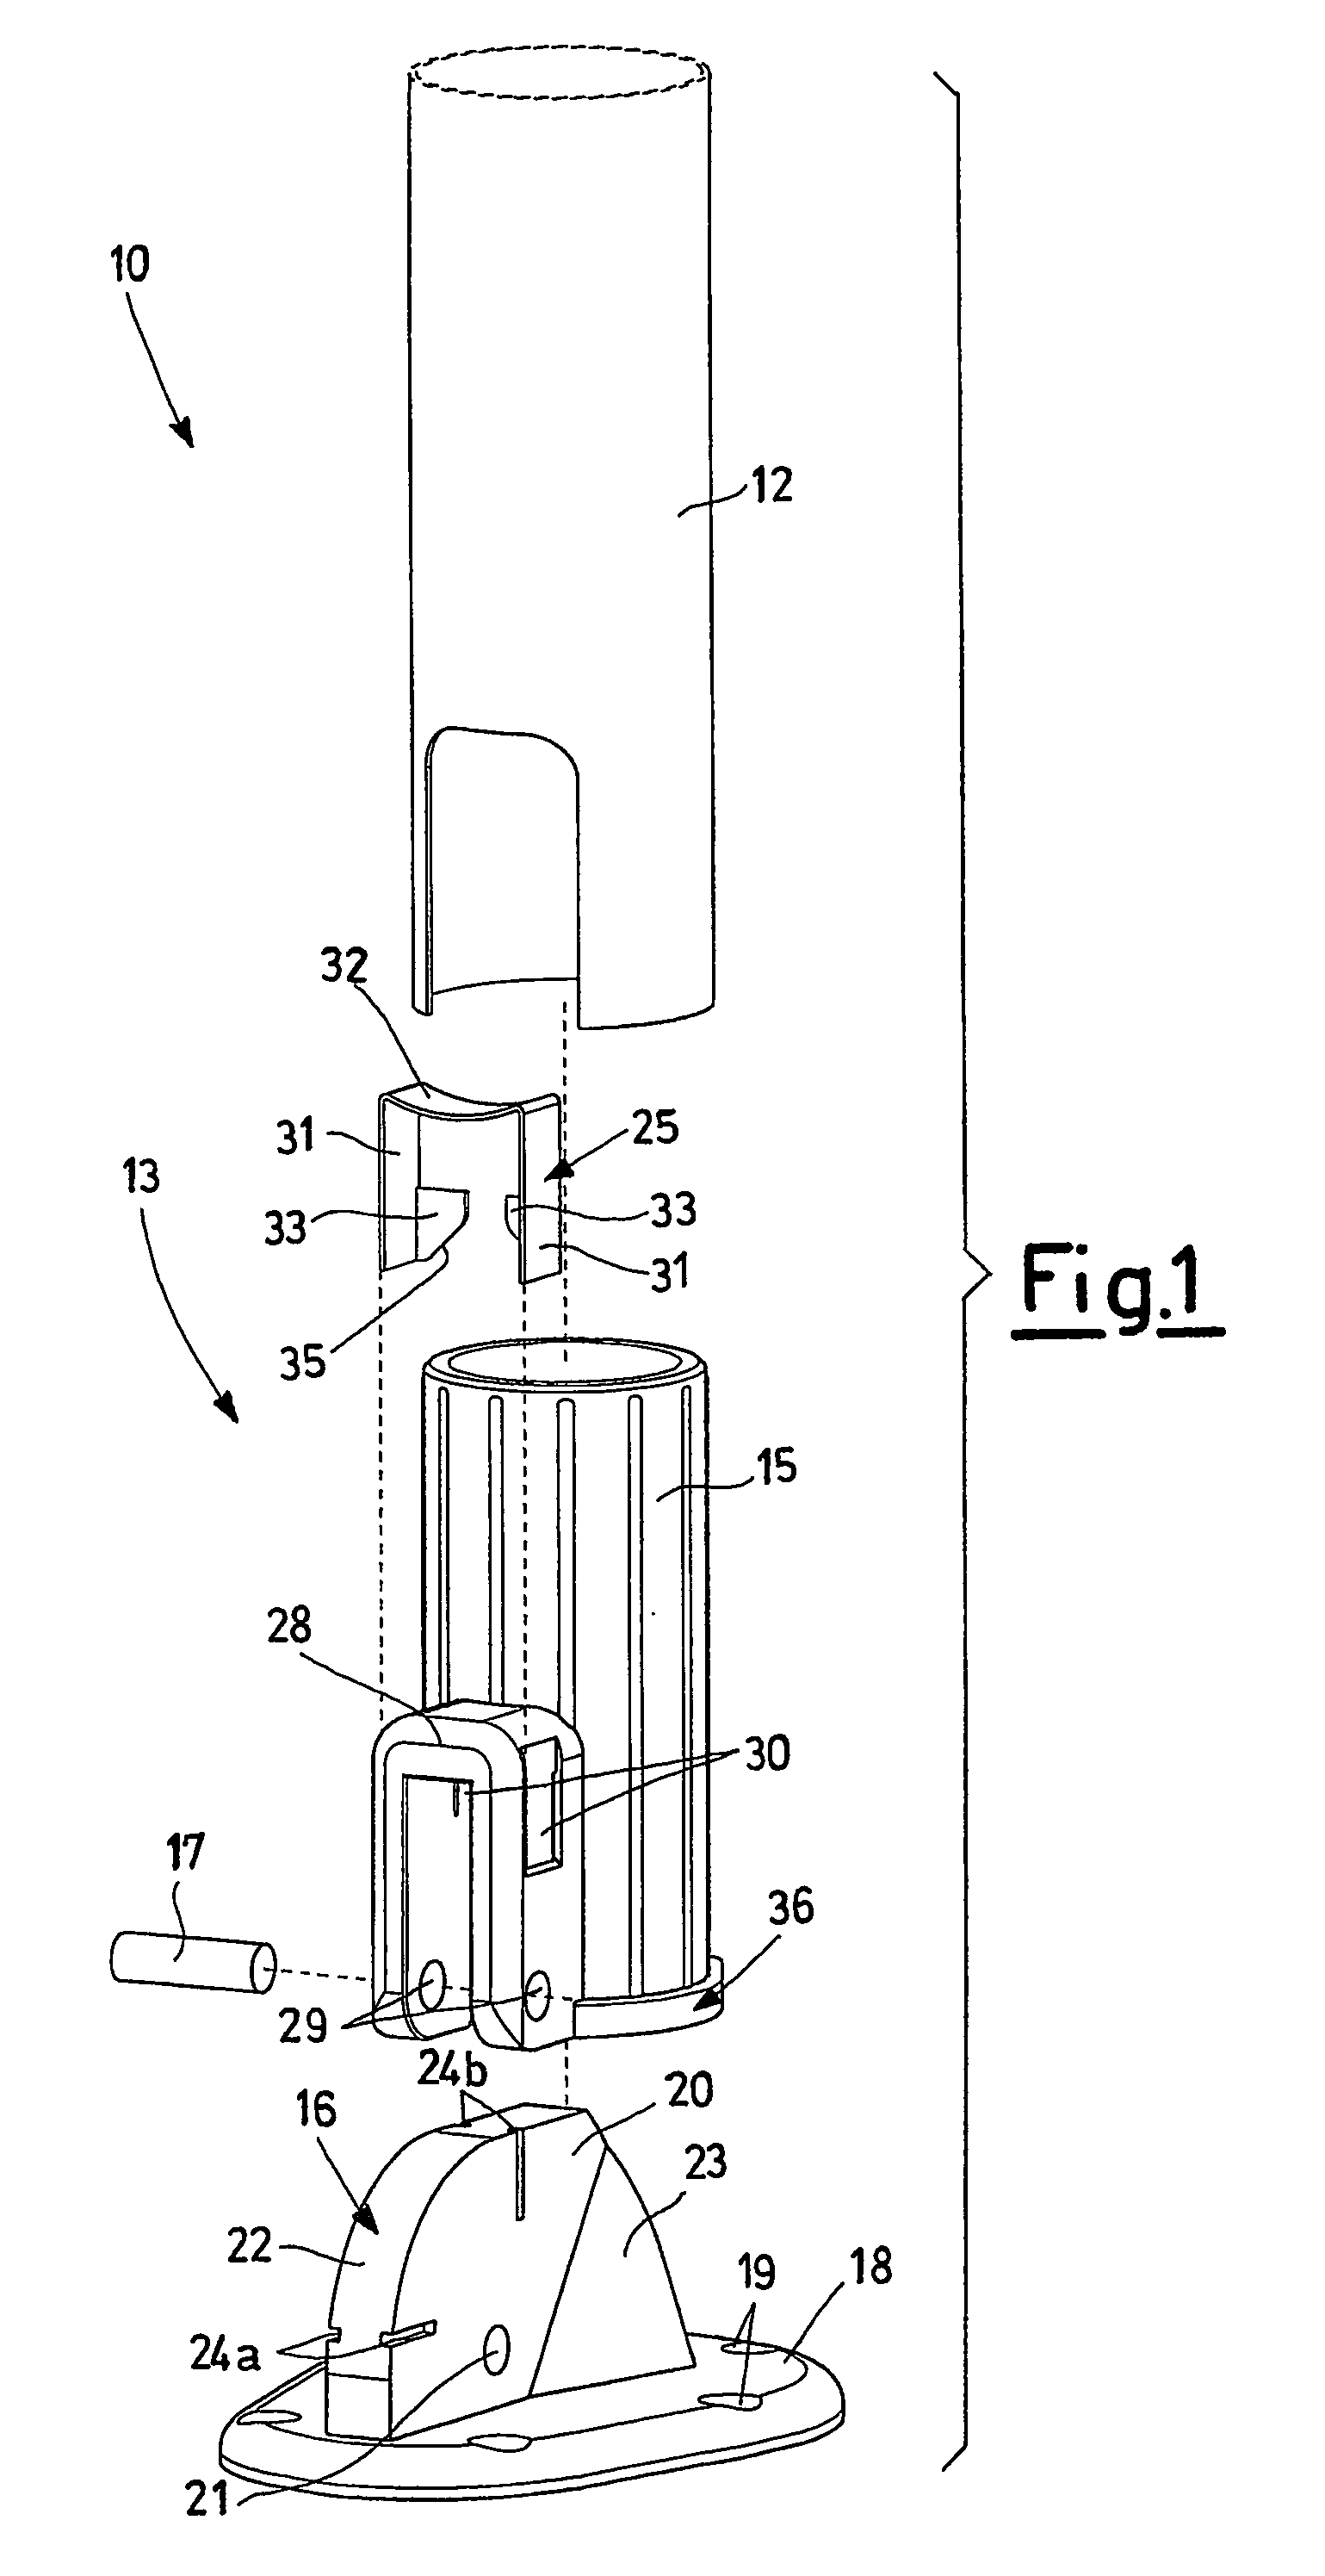 Fold-away legs for support surfaces